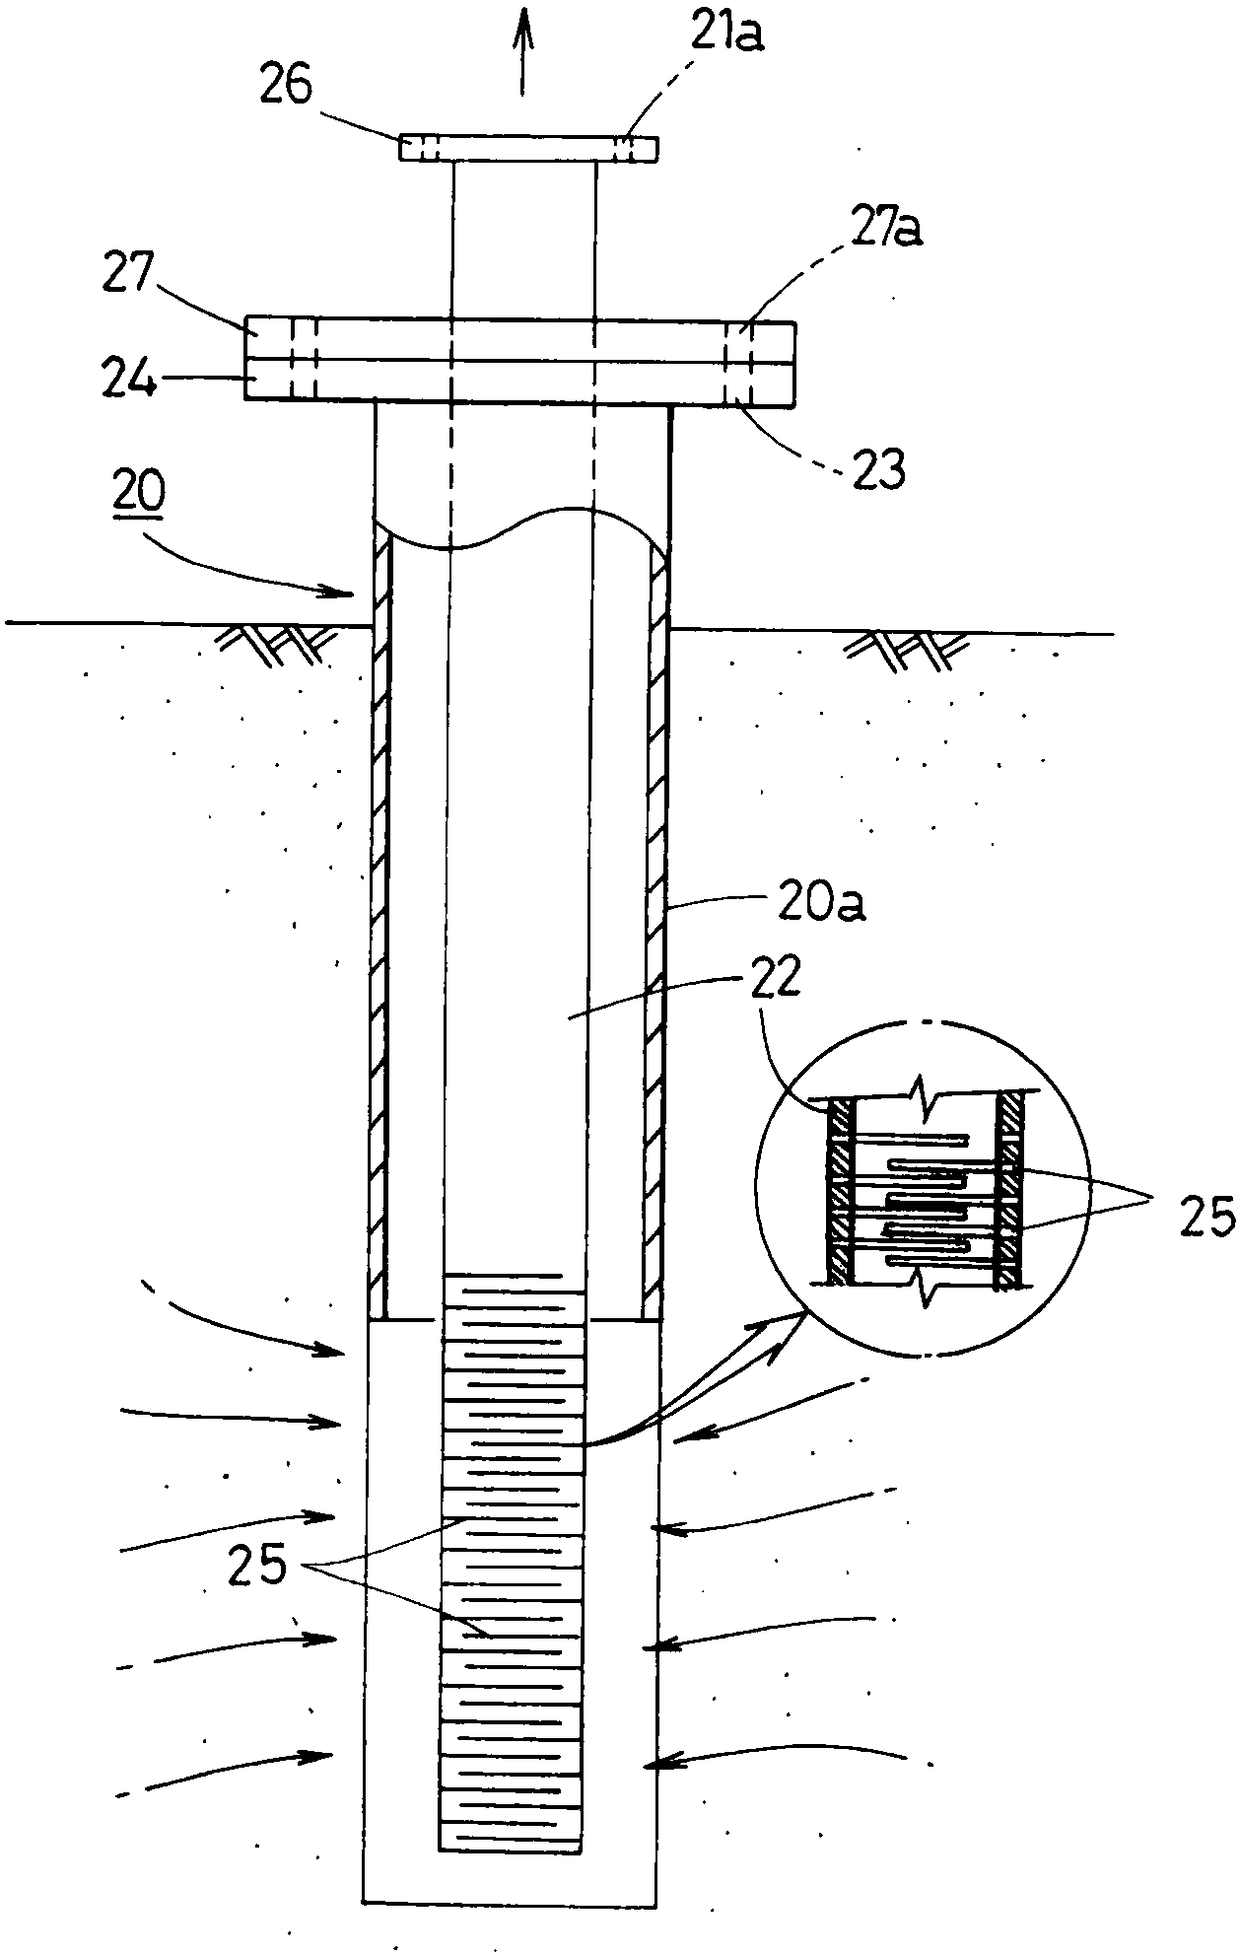 In Situ Treatment Apparatus applying Pneumatic Fracturing and Forced Extraction for oil contaminated Soil